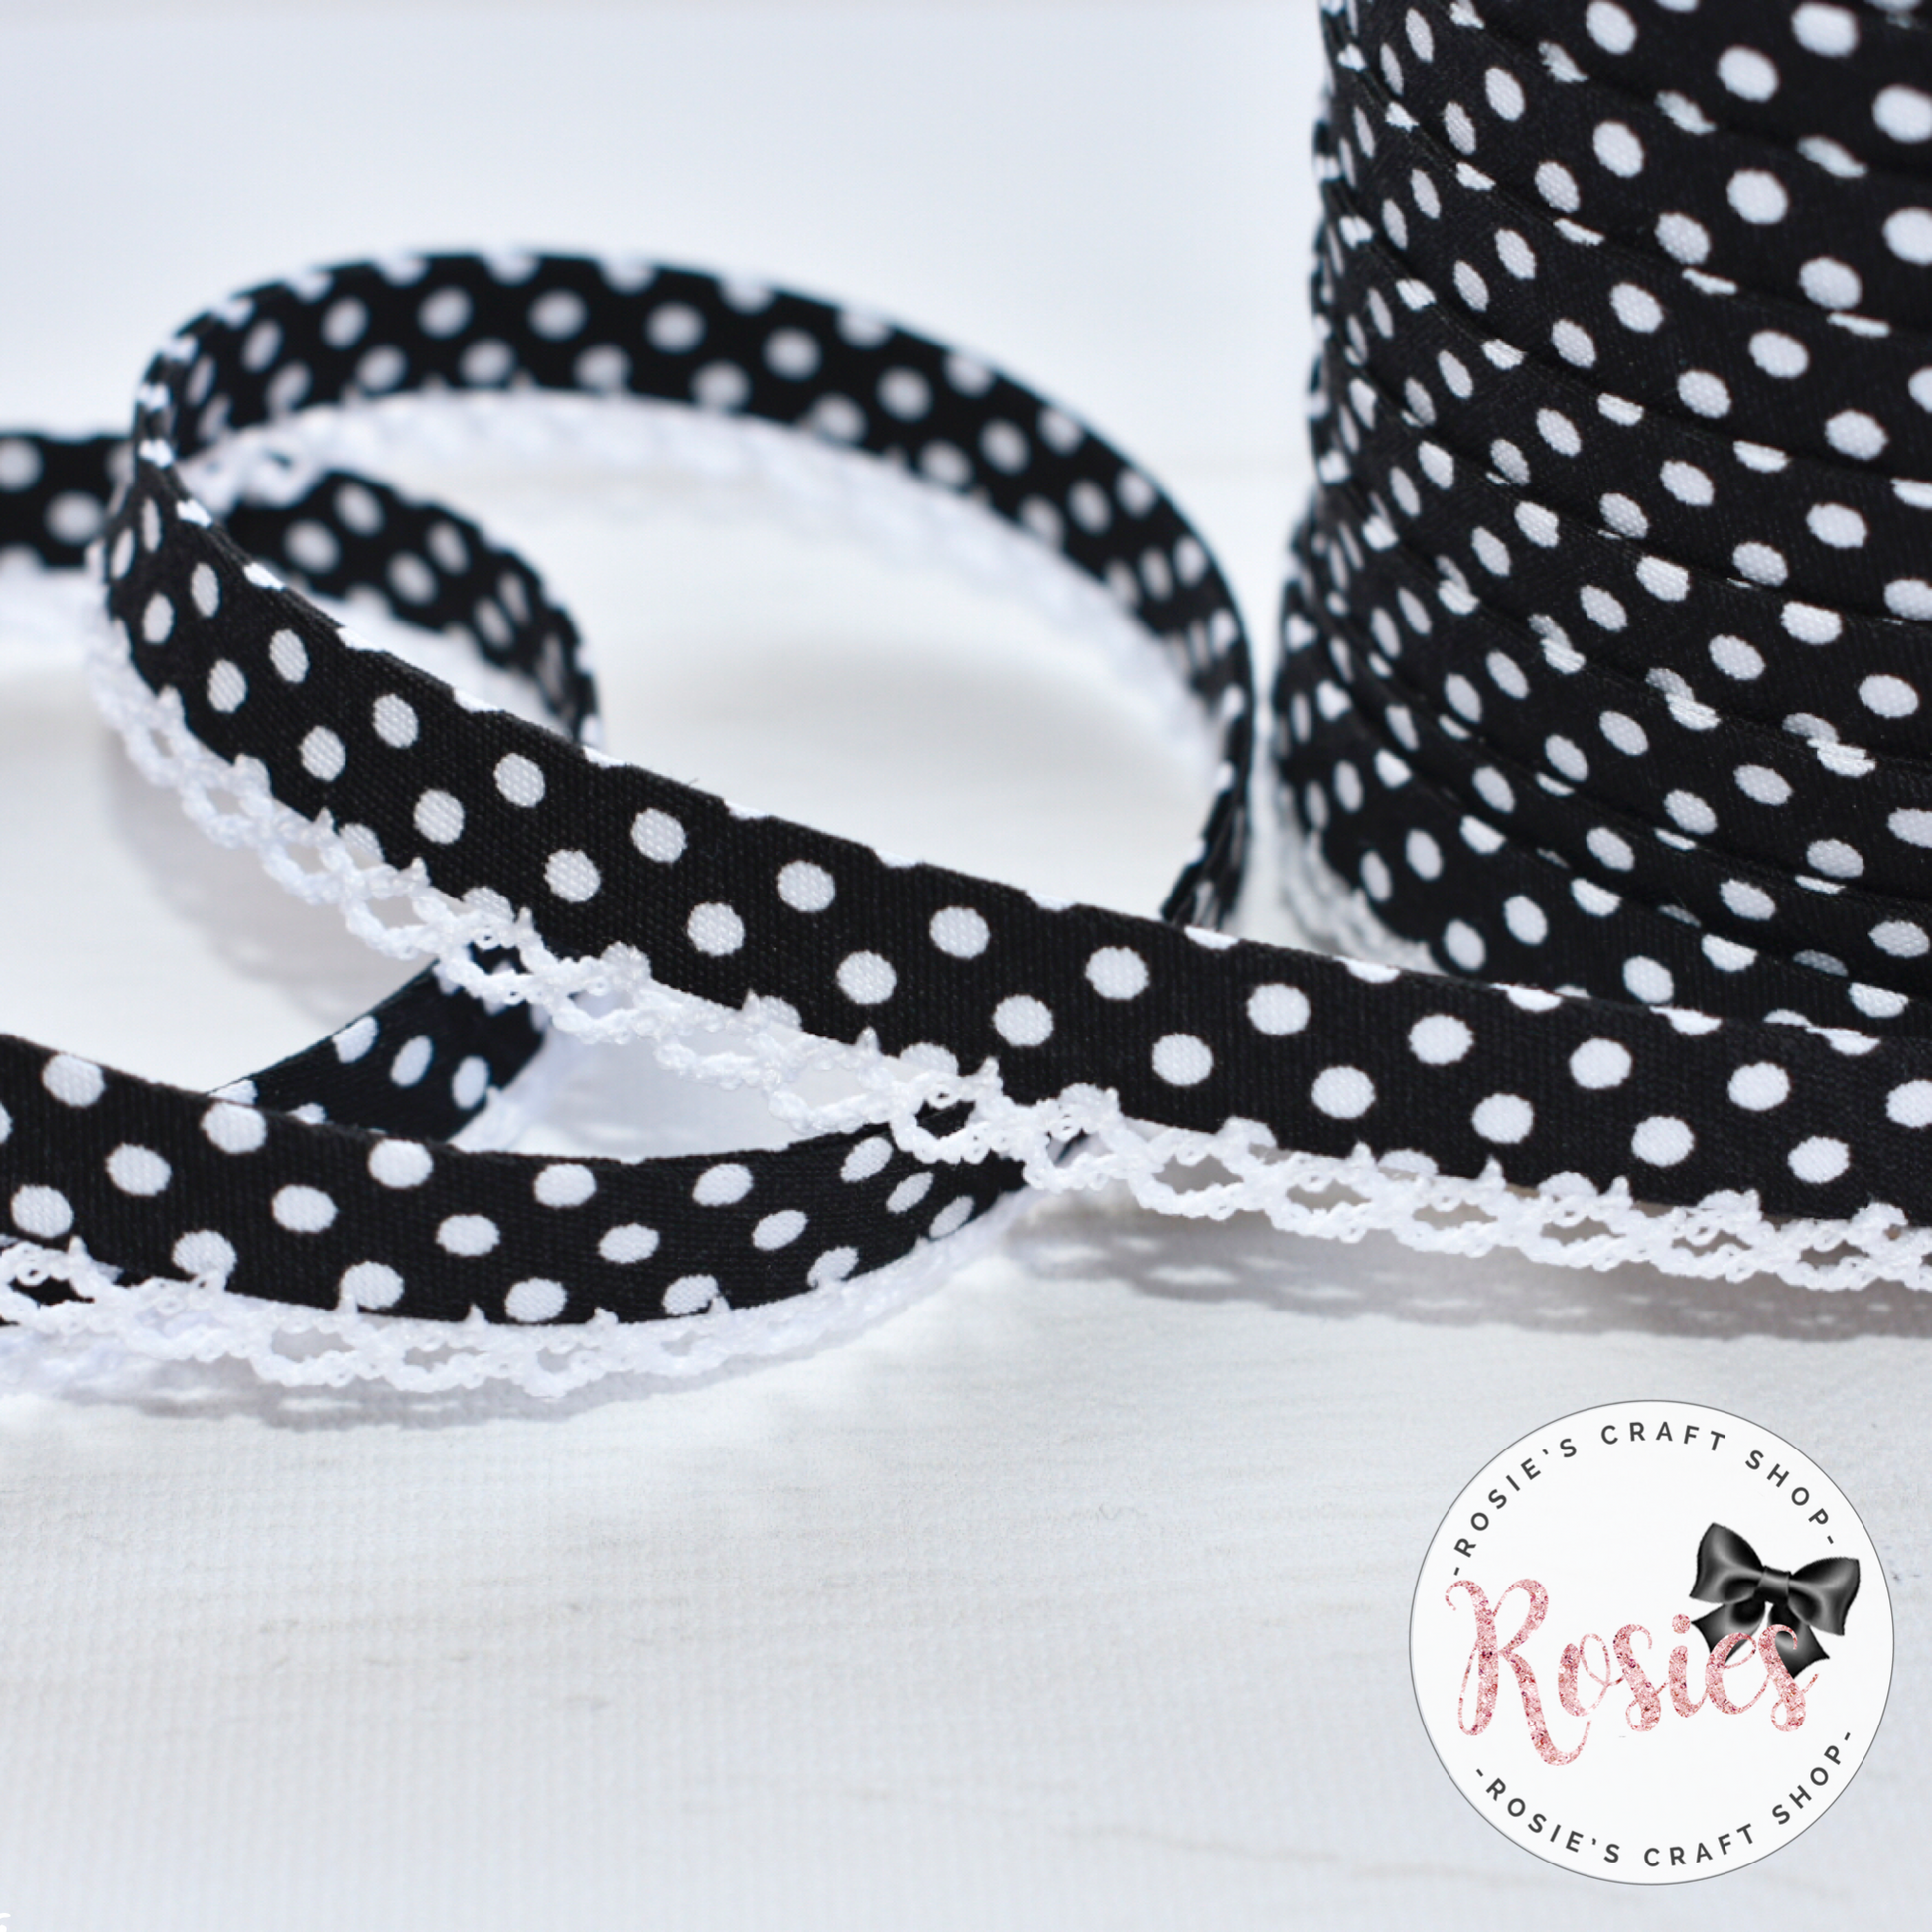 12mm Black with White Polka Dots Pre-Folded Bias Binding with Scallop Lace Edge - Rosie's Craft Shop Ltd